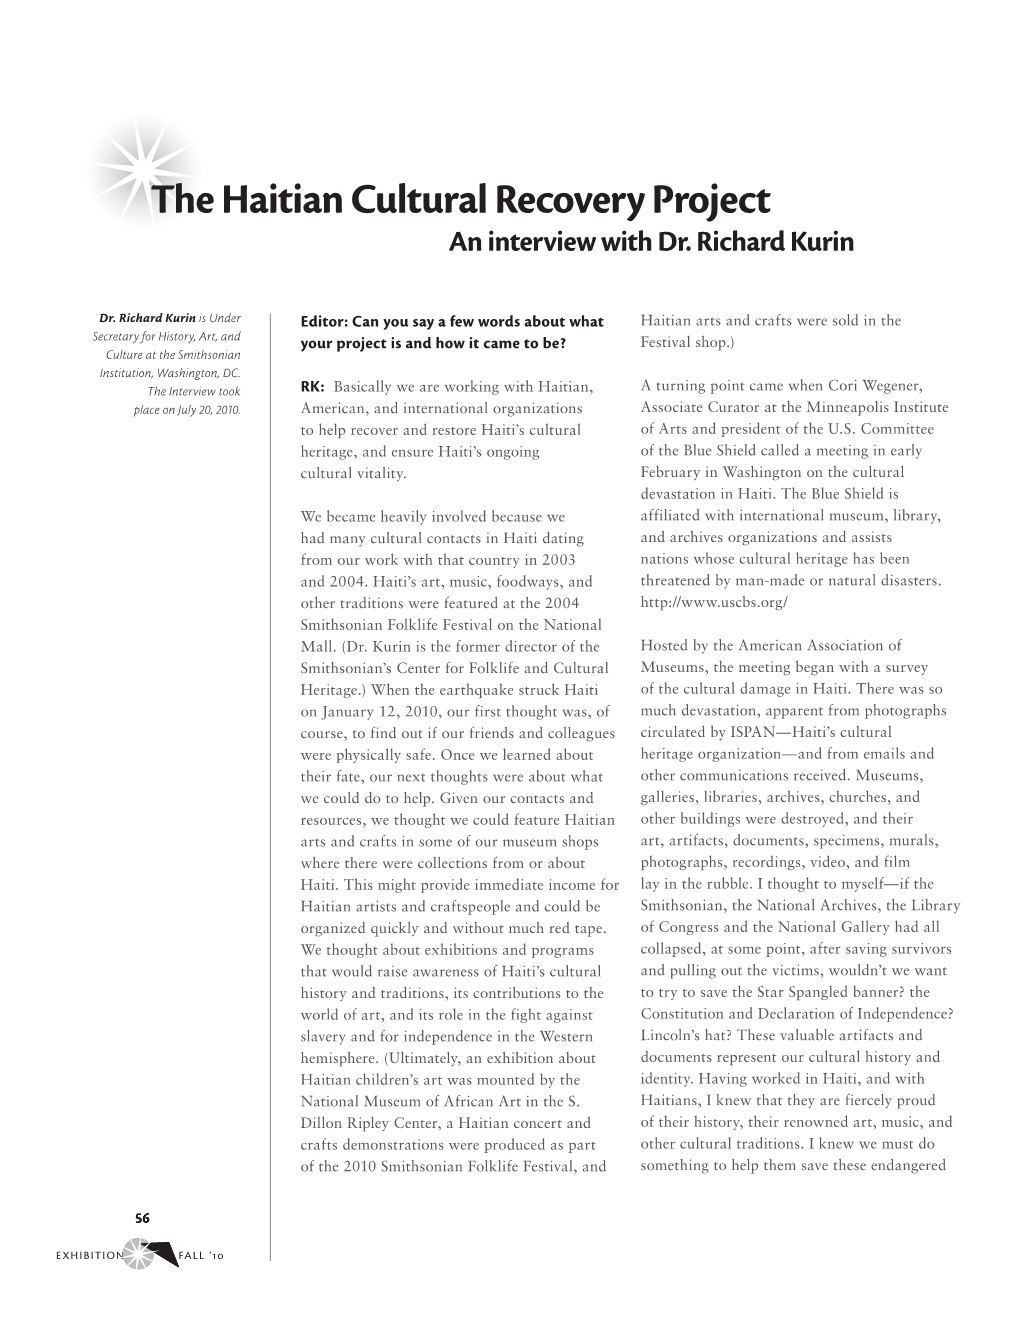 The Haitian Cultural Recovery Project an Interview with Dr